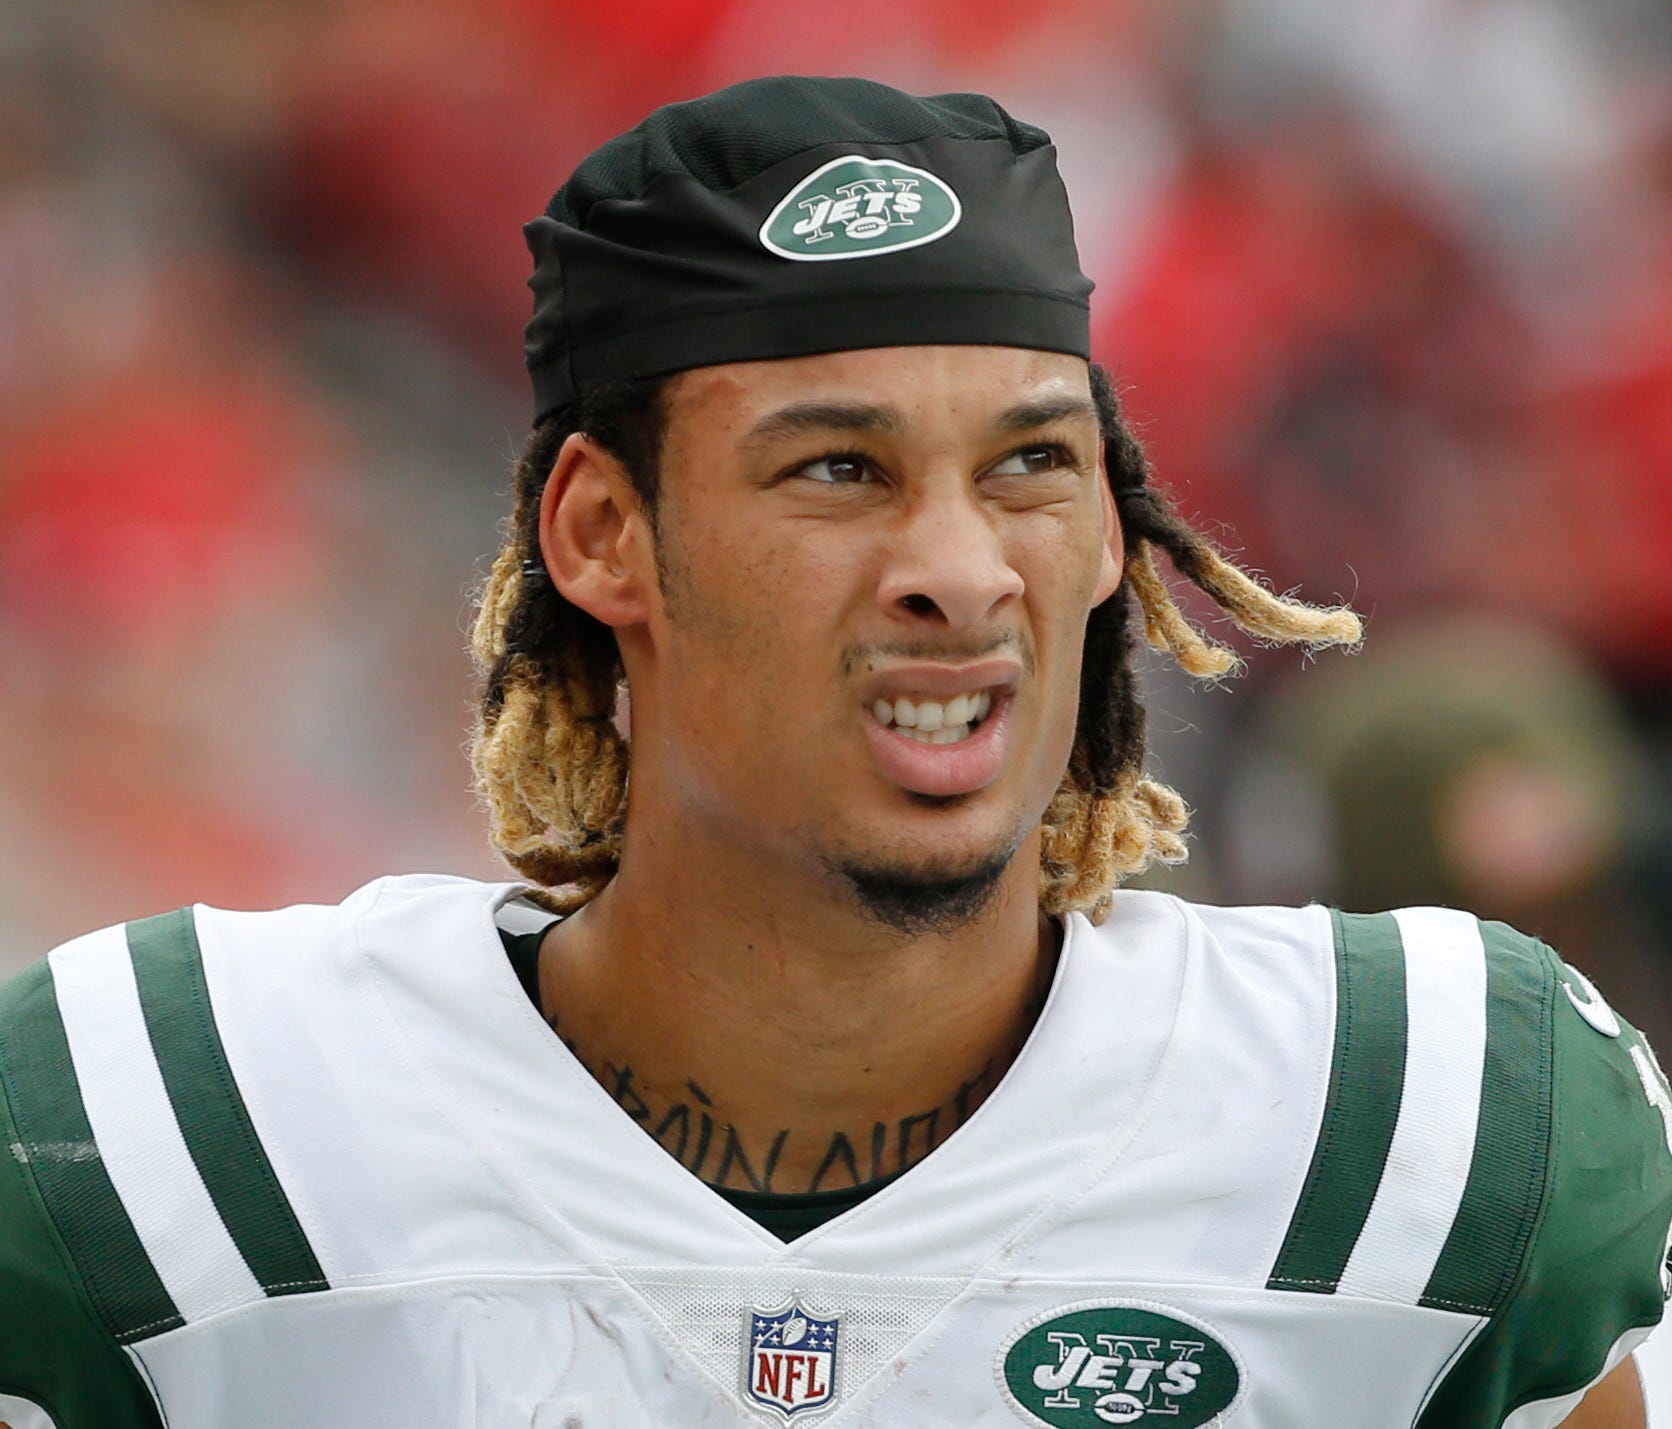 An arrest warrant was issued Wednesday for New York Jets wide receiver Robby Anderson after he failed to appear for a court date in Florida.